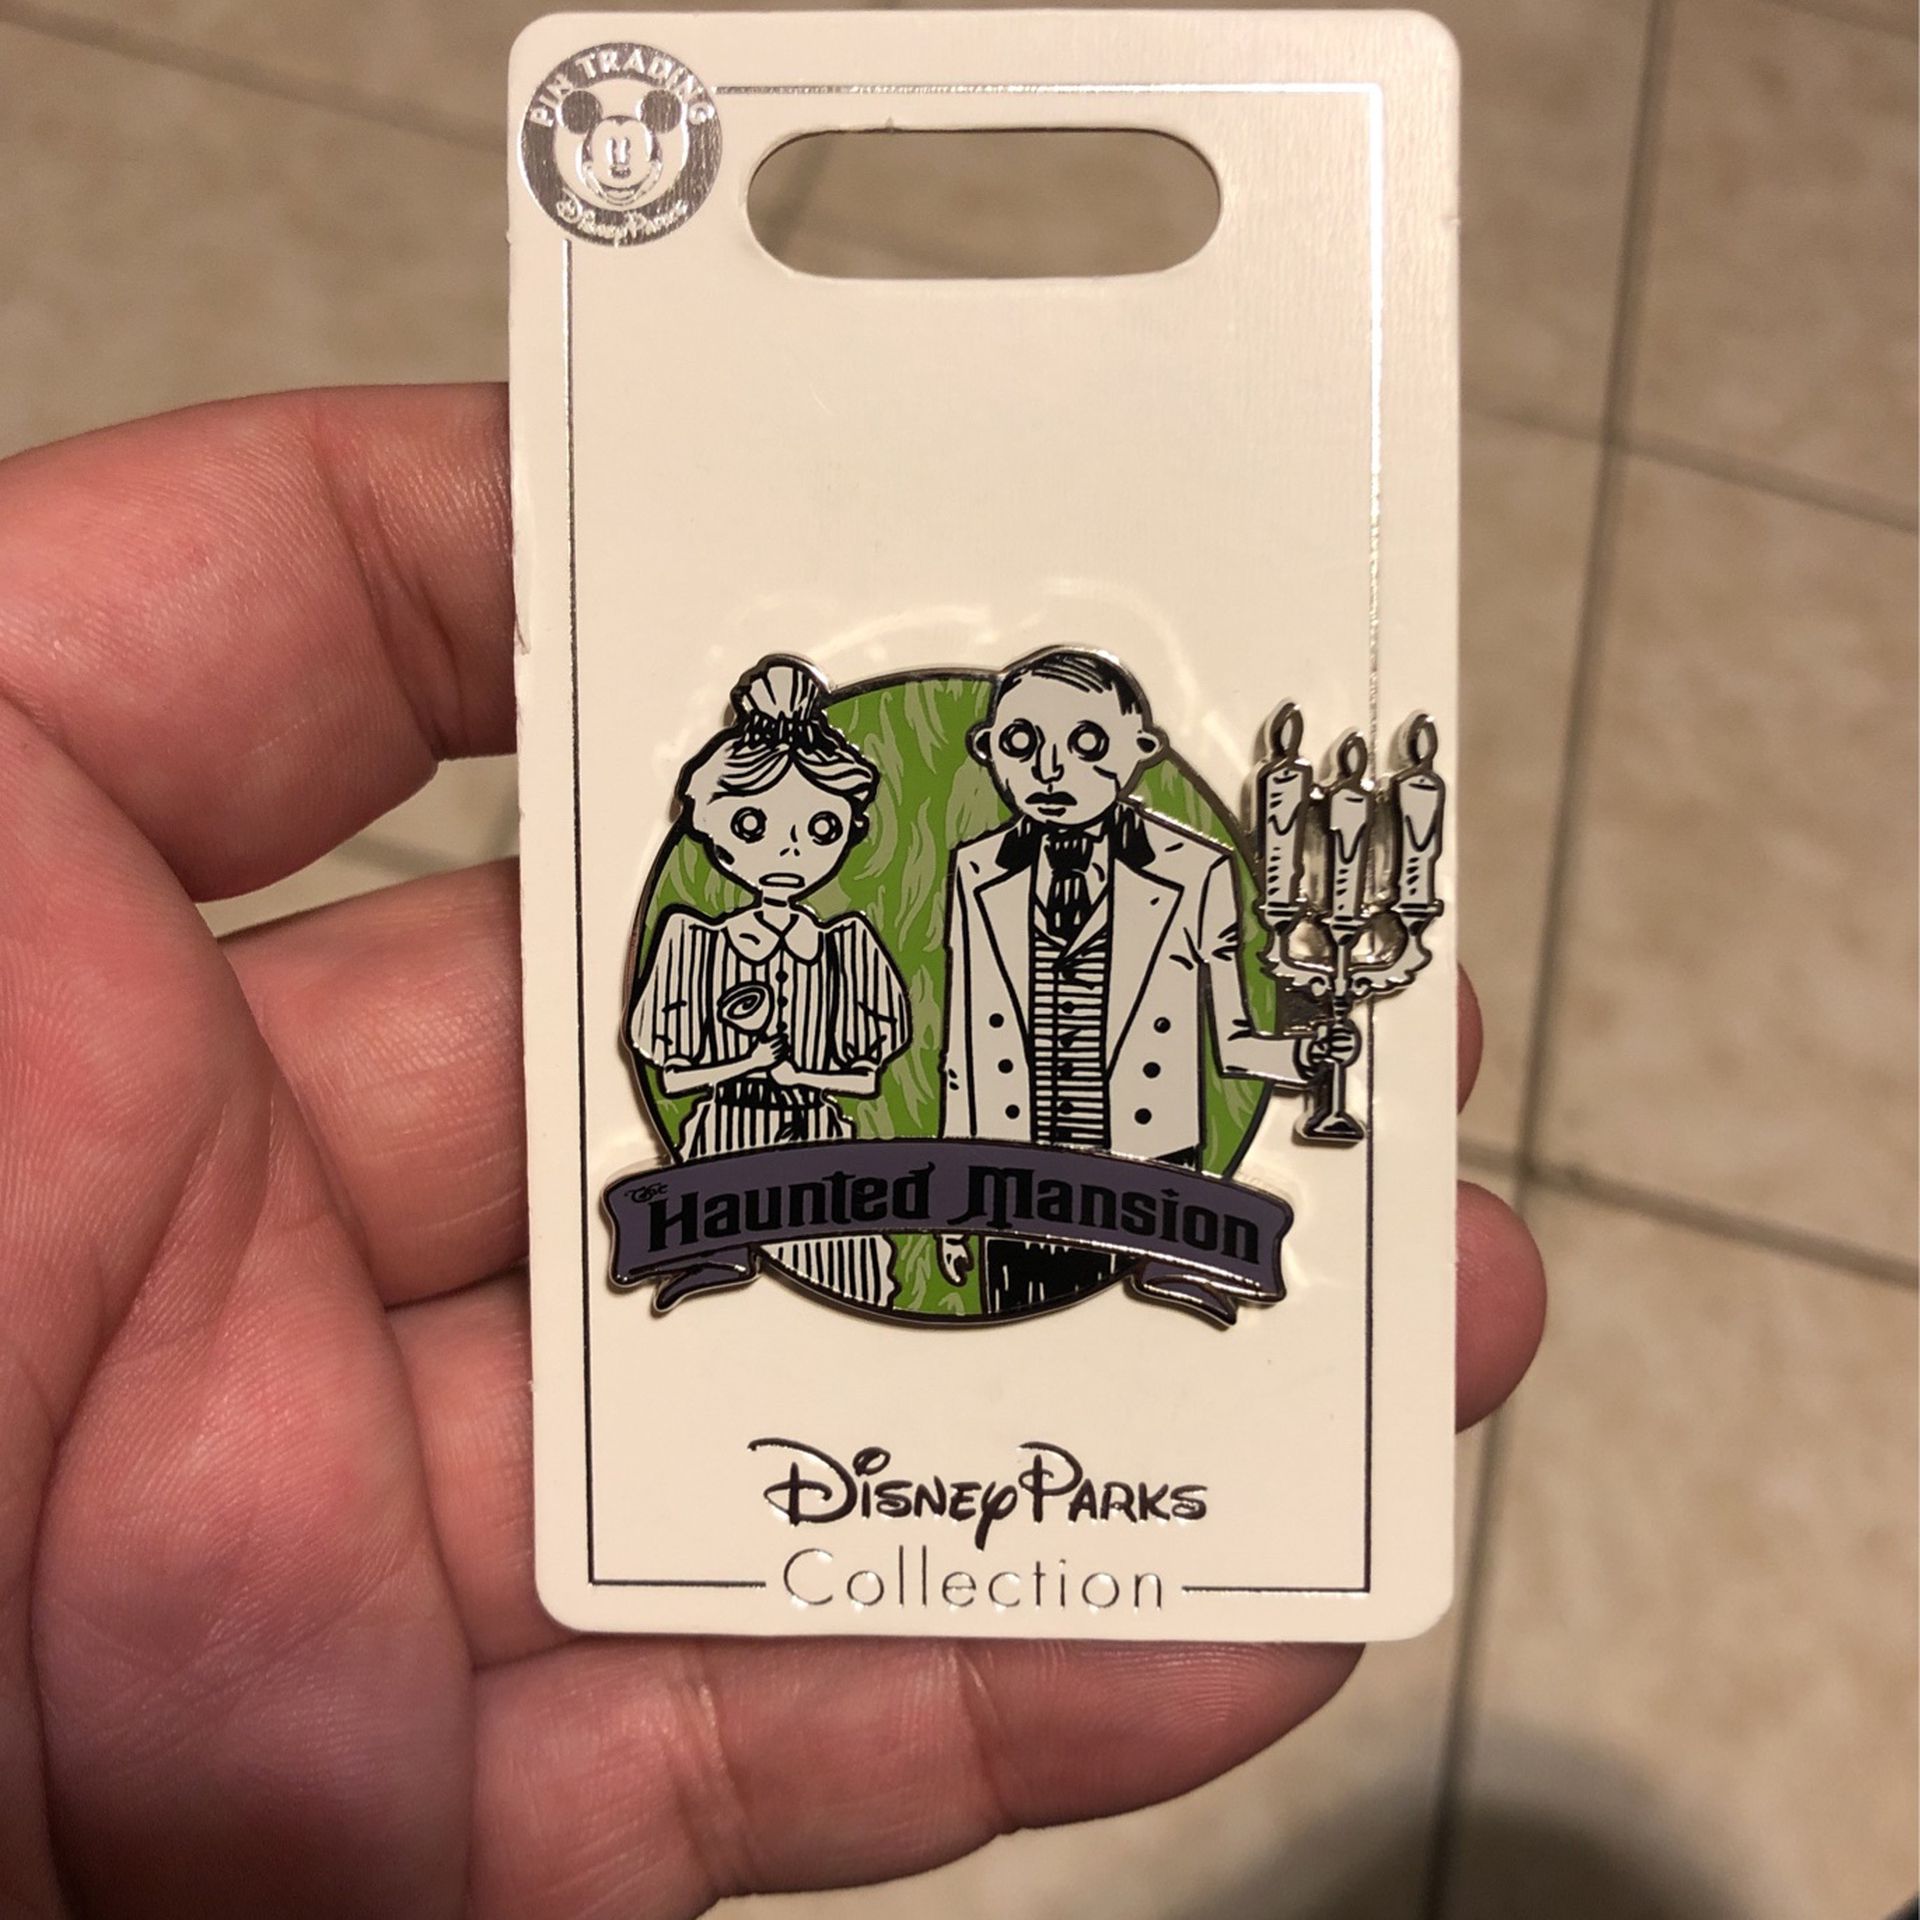 Walt Disney World Parks Collection (Haunted Mansion) Pin